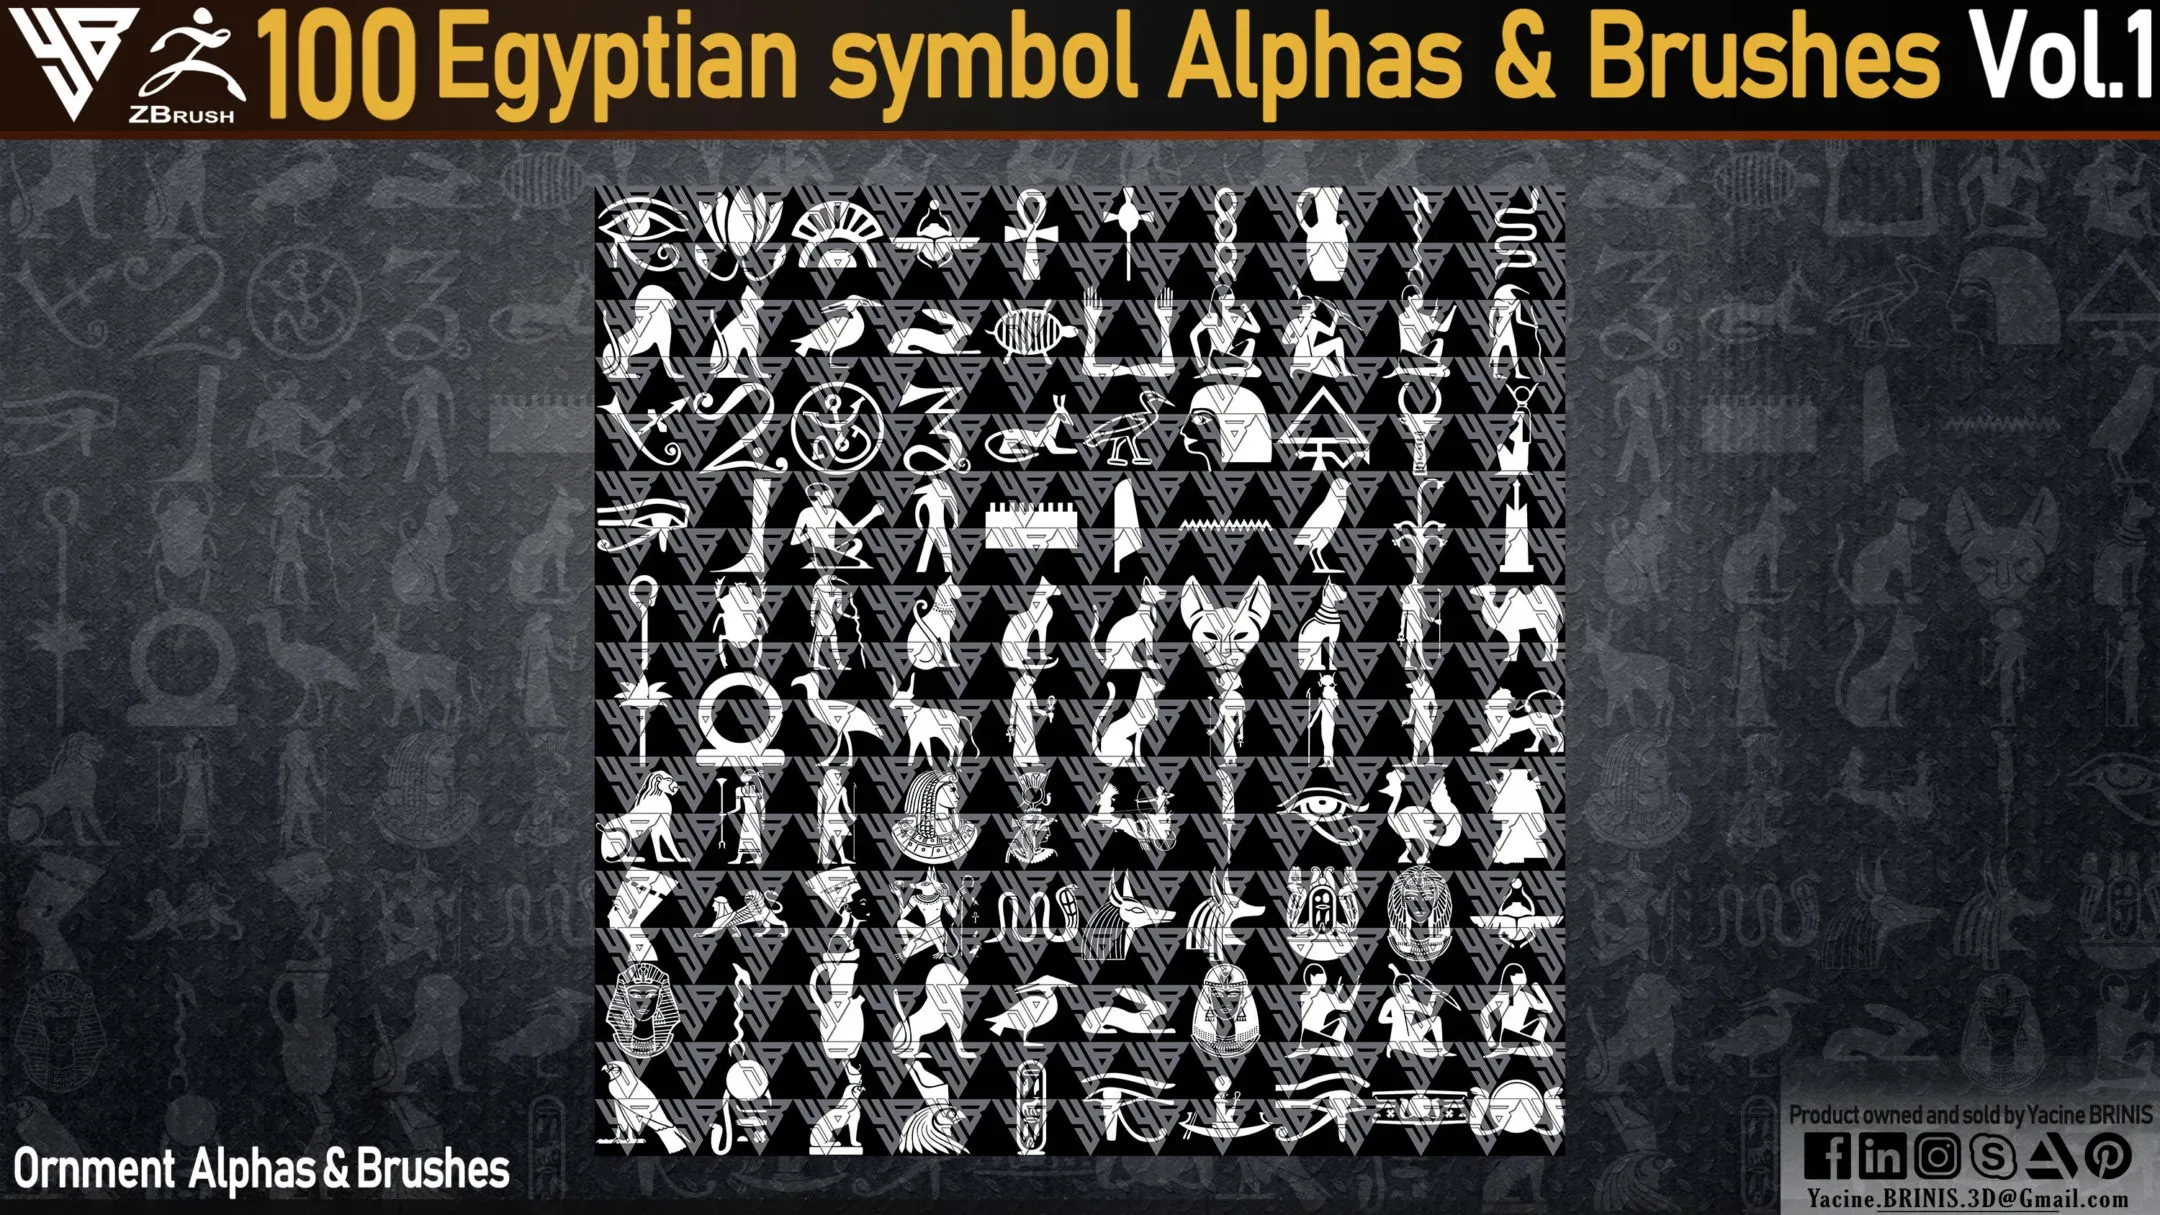 100 Egyptian Ornament (Alphas & IMM Brushes)